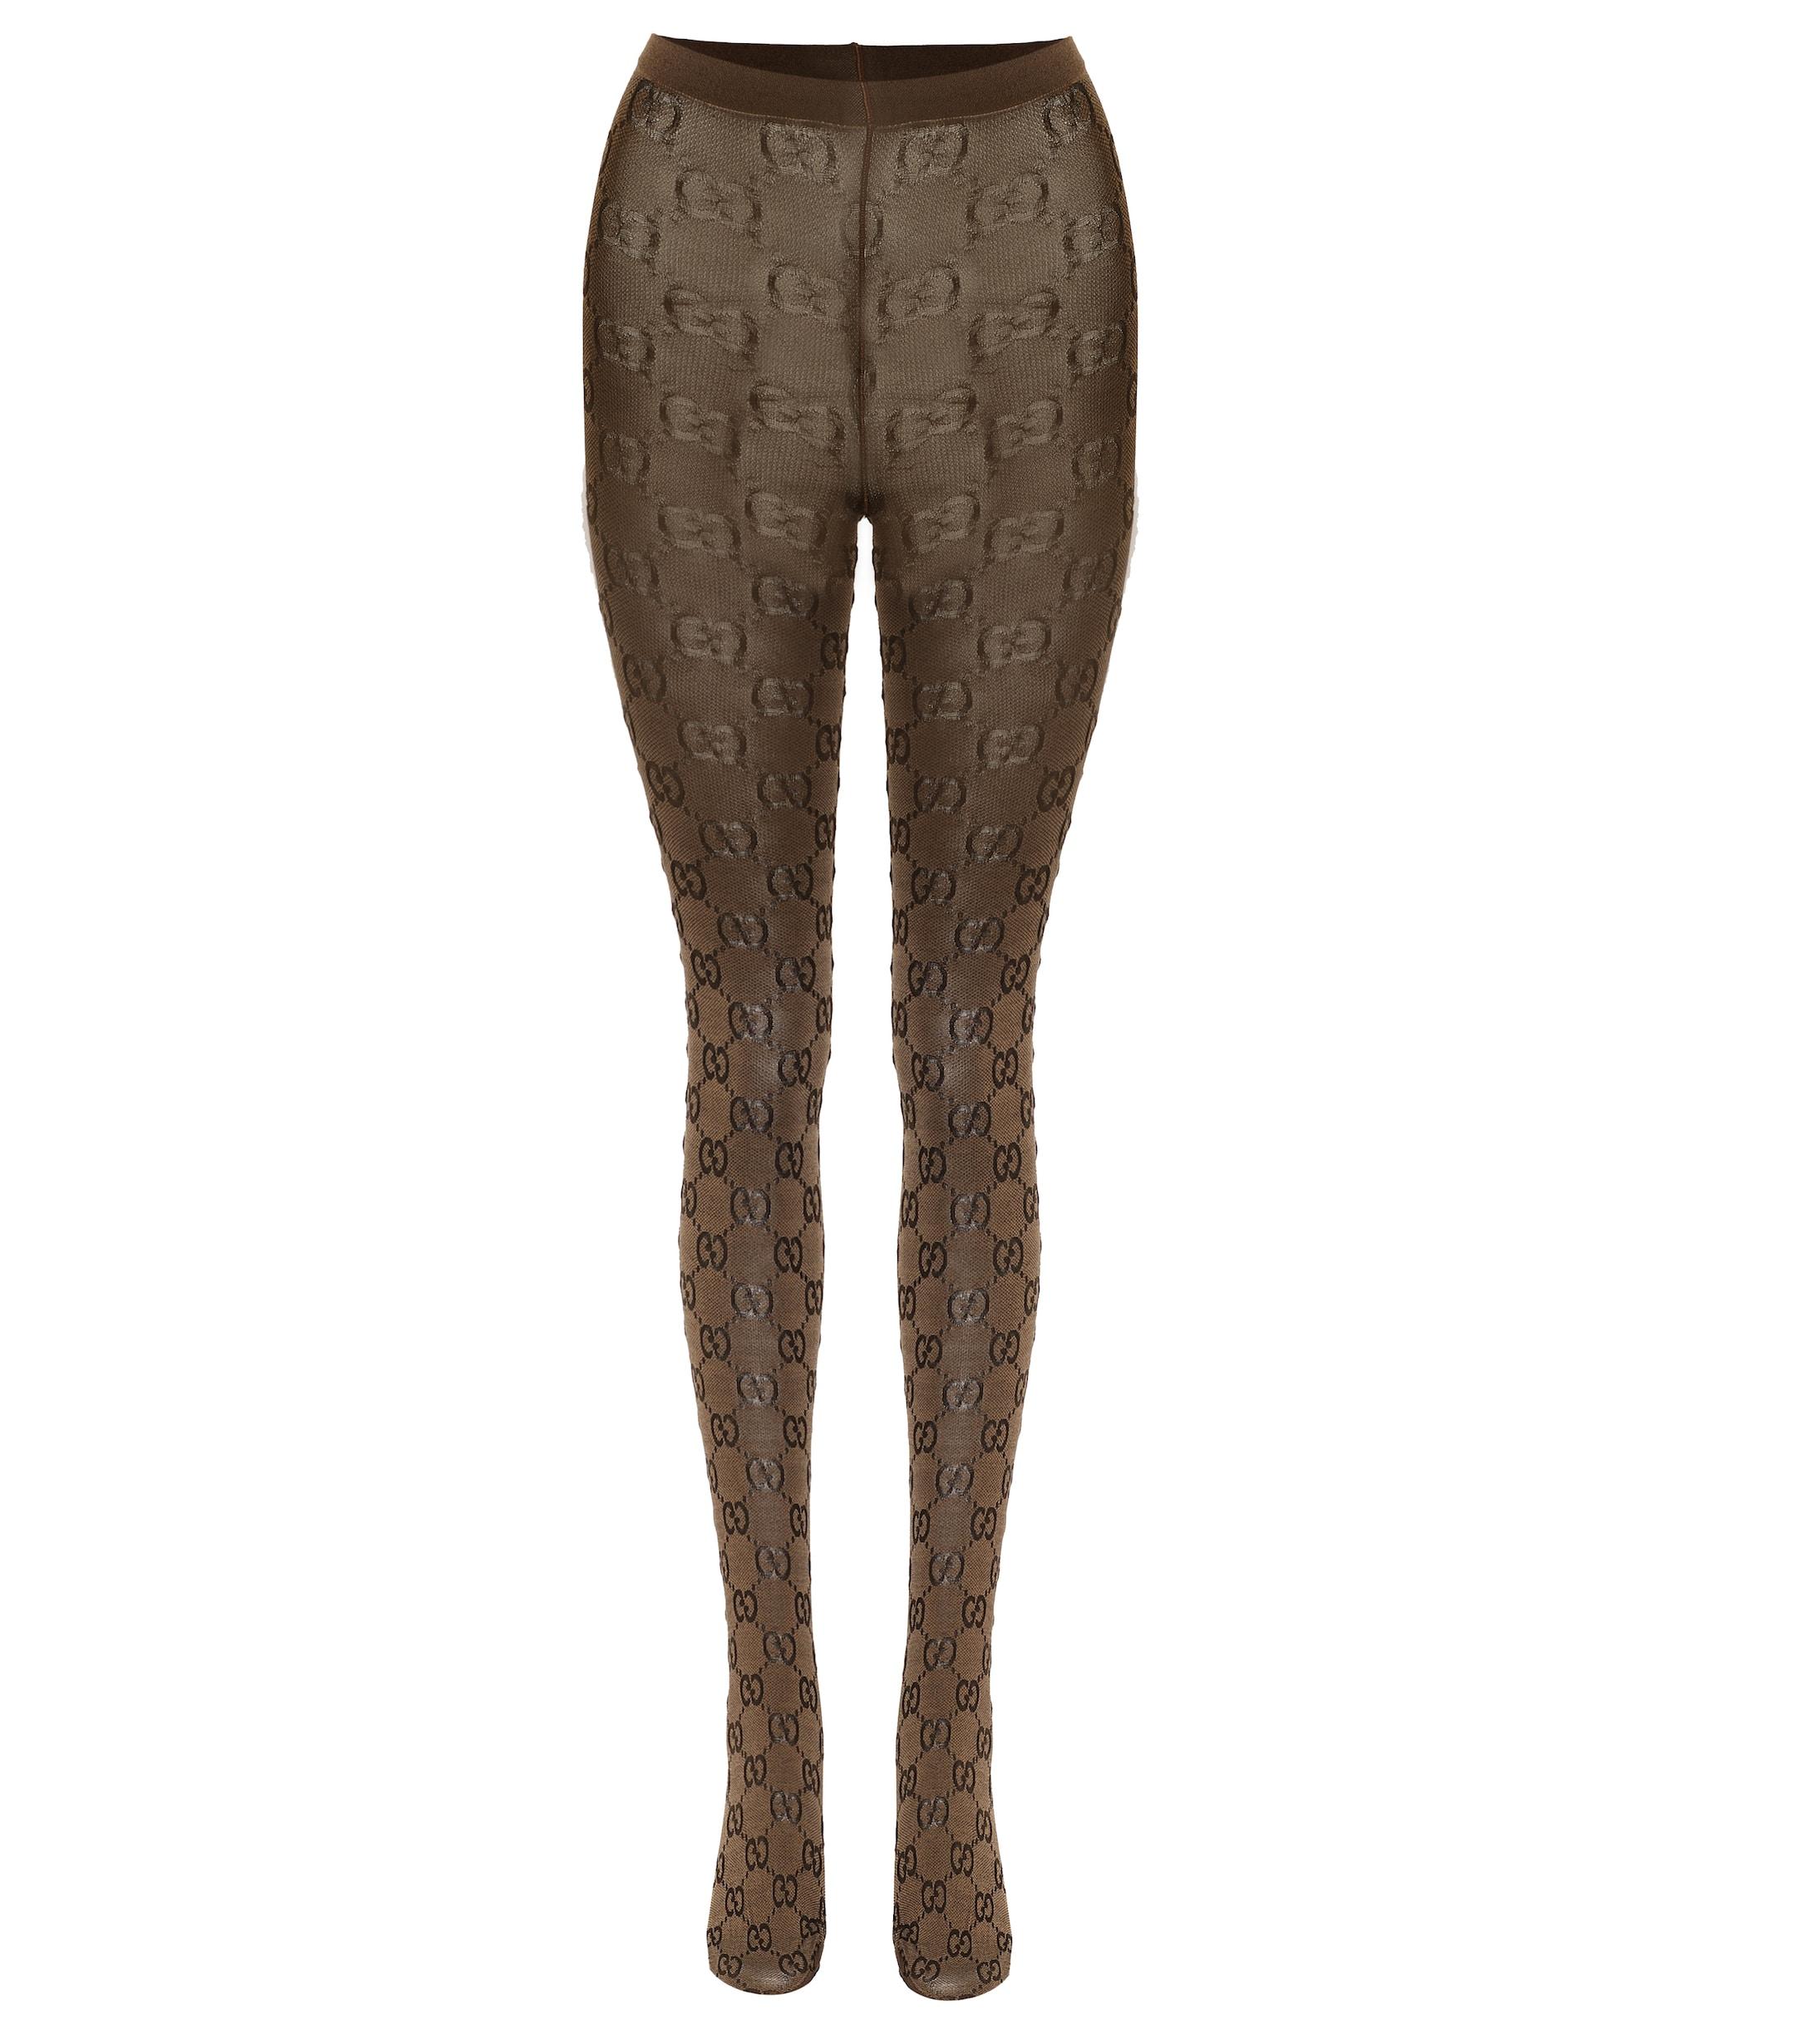 Gucci Synthetic GG Pattern Tights in Beige (Brown) - Save 40% - Lyst